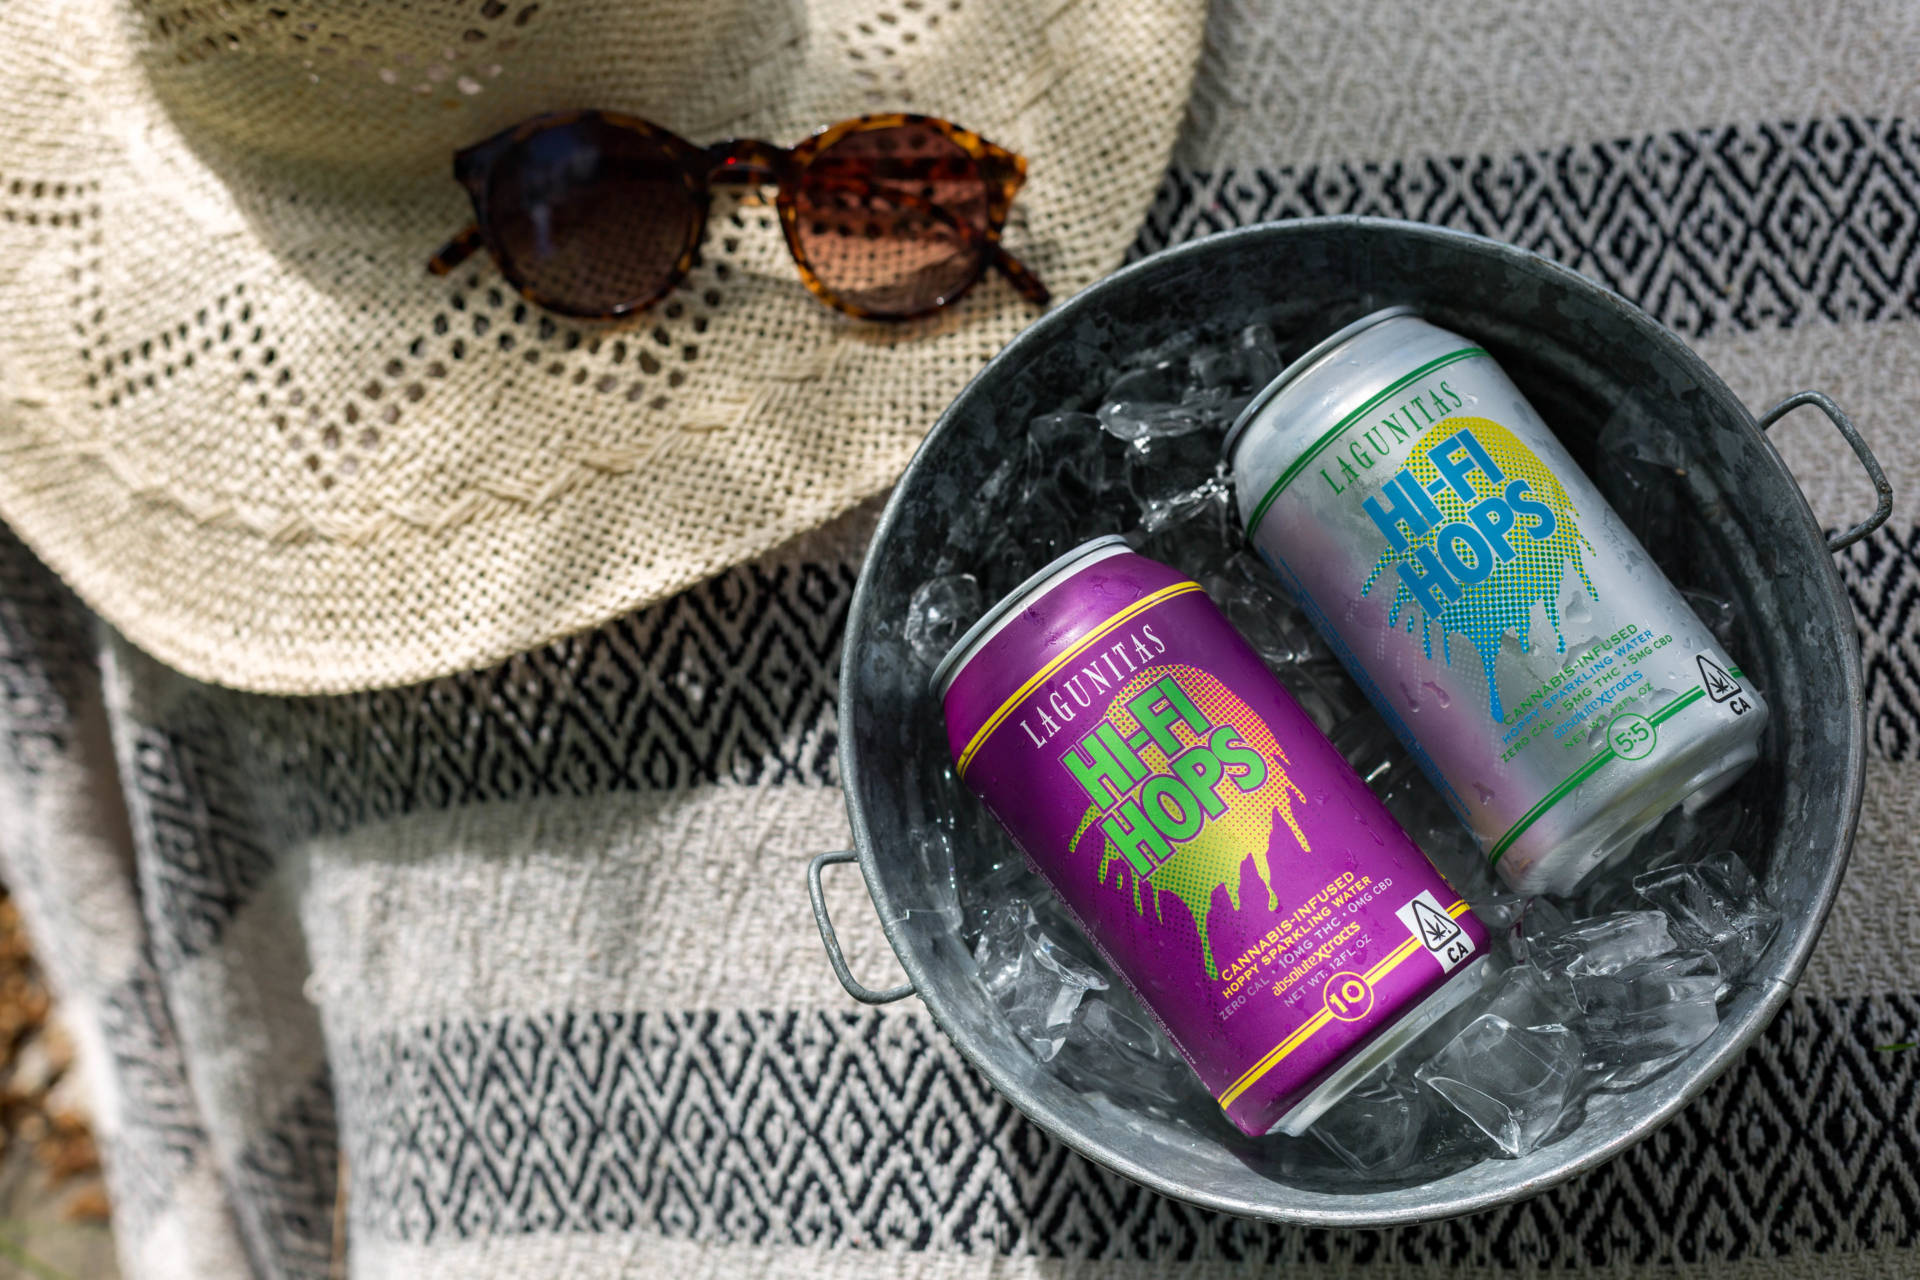 Meet Hi-Fi-Hops, the sparkling THC “beer” from Lagunitas and AbsoluteXtracts.